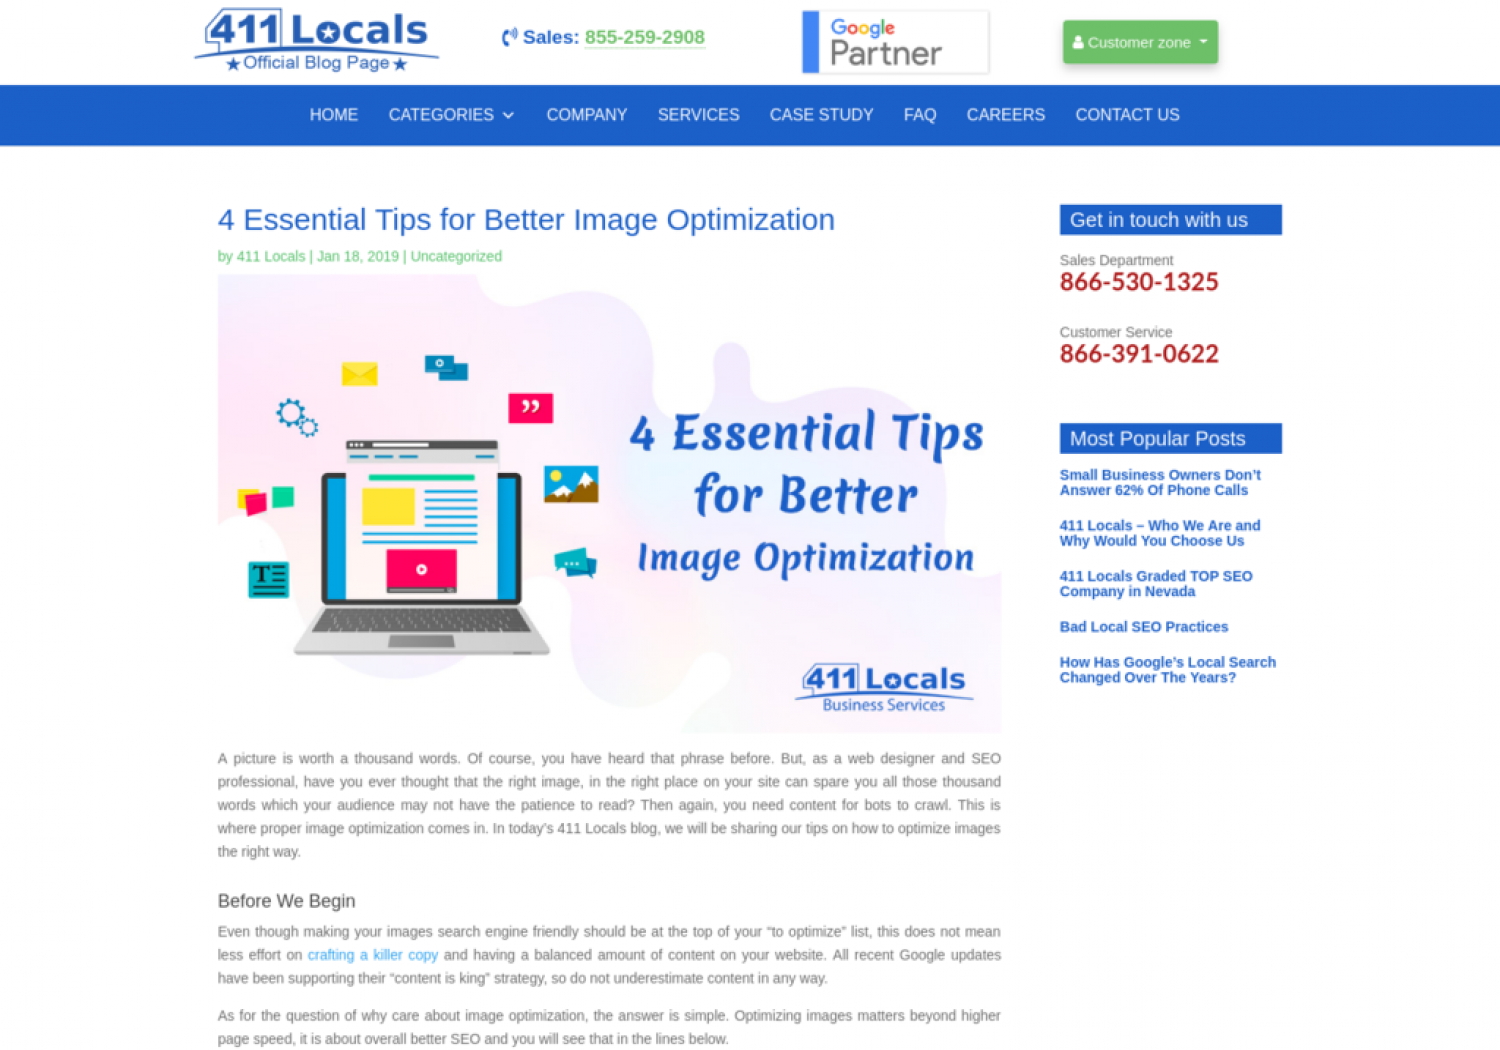 4 Essential Tips for Better Image Optimization Infographic